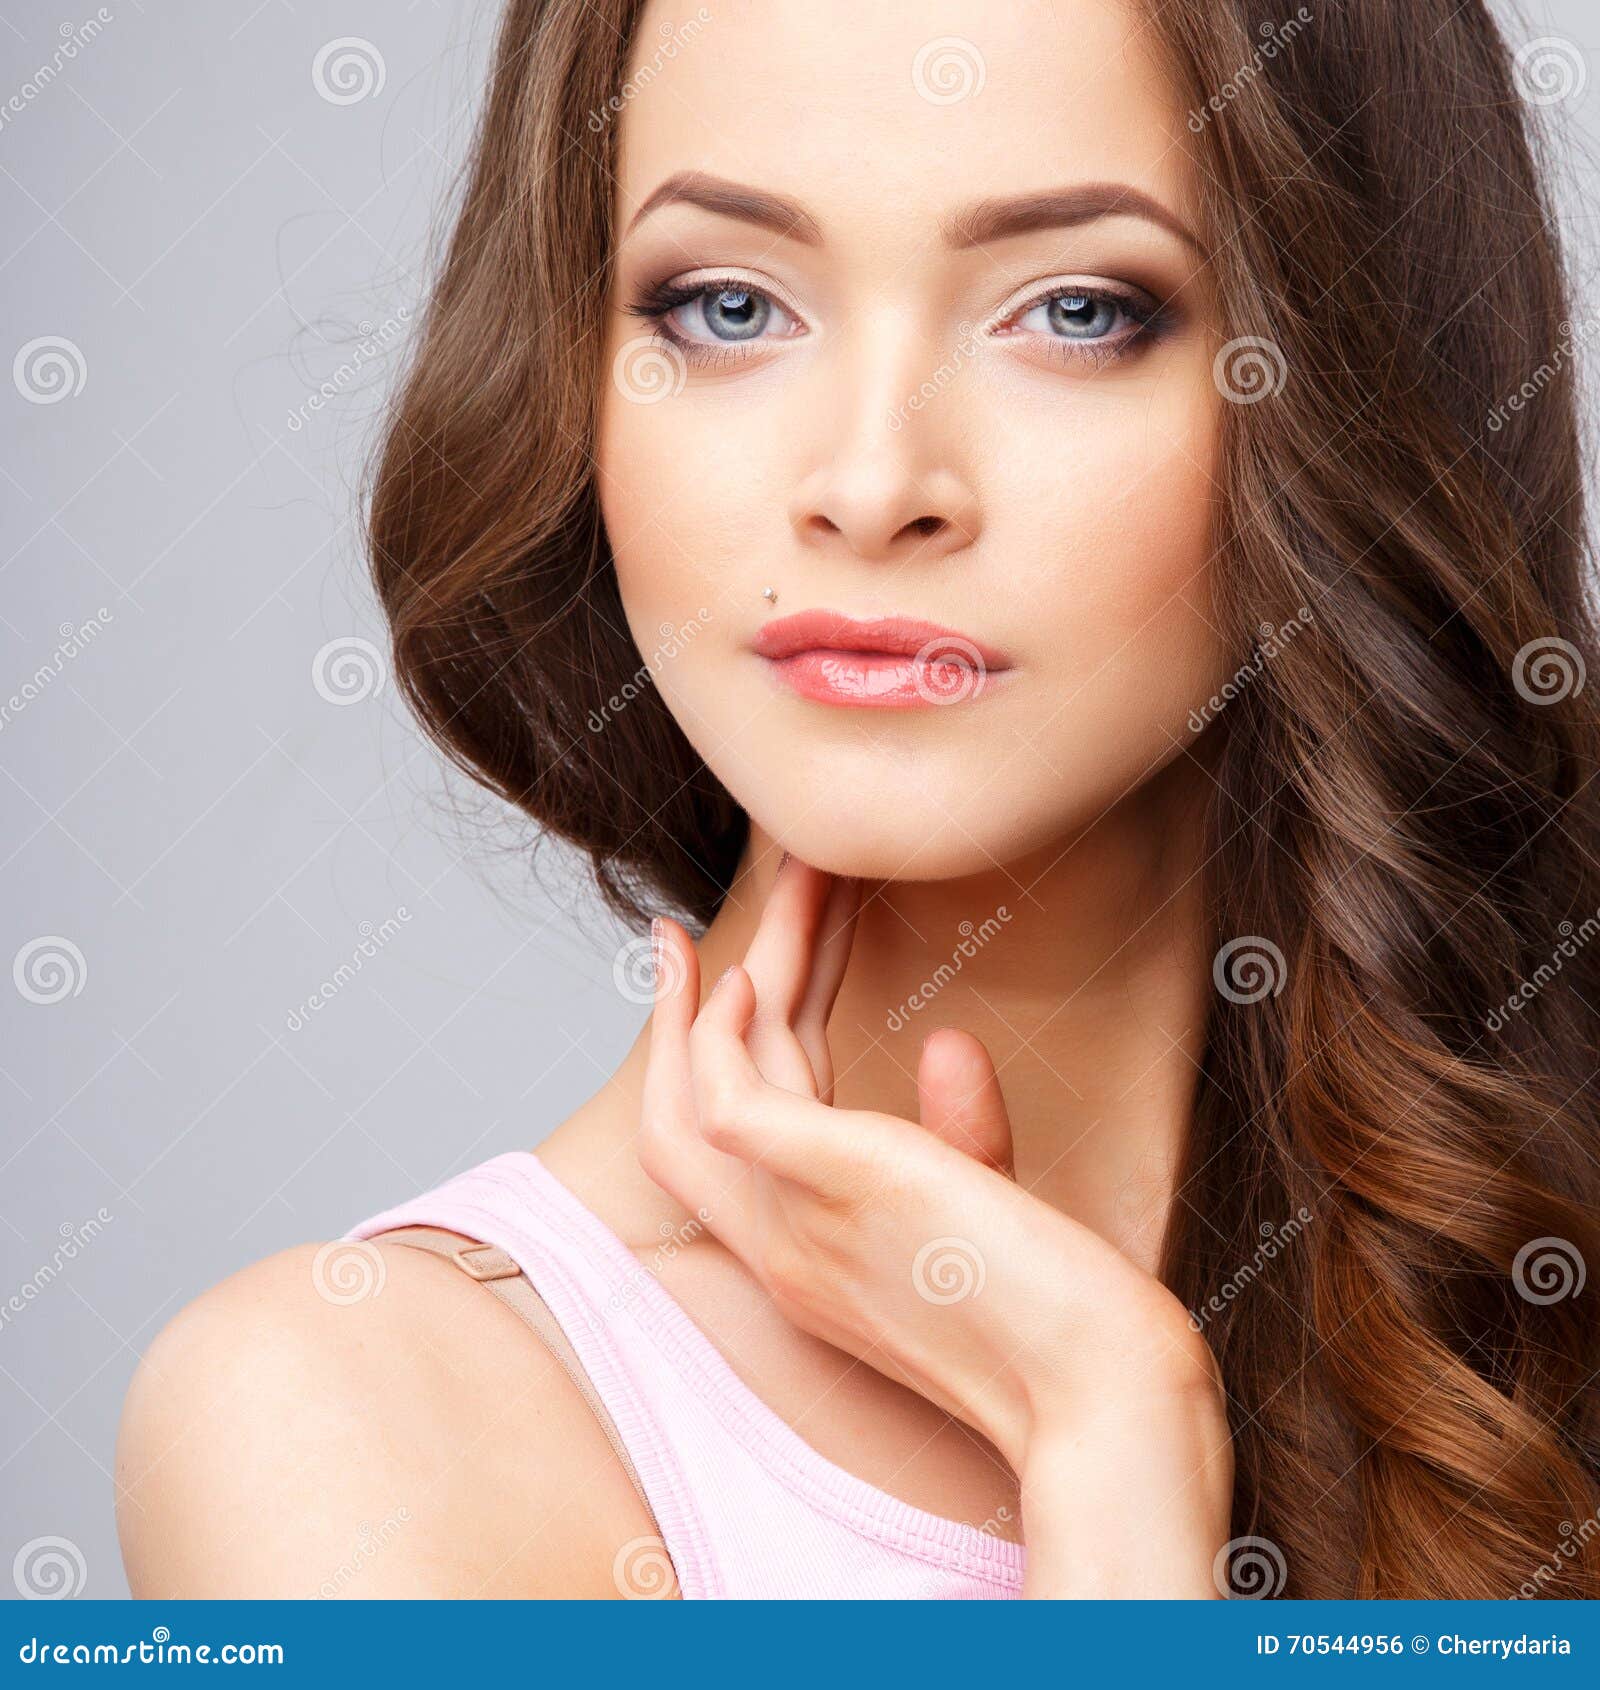 IMG - Close-up portrait of beautiful young woman with 